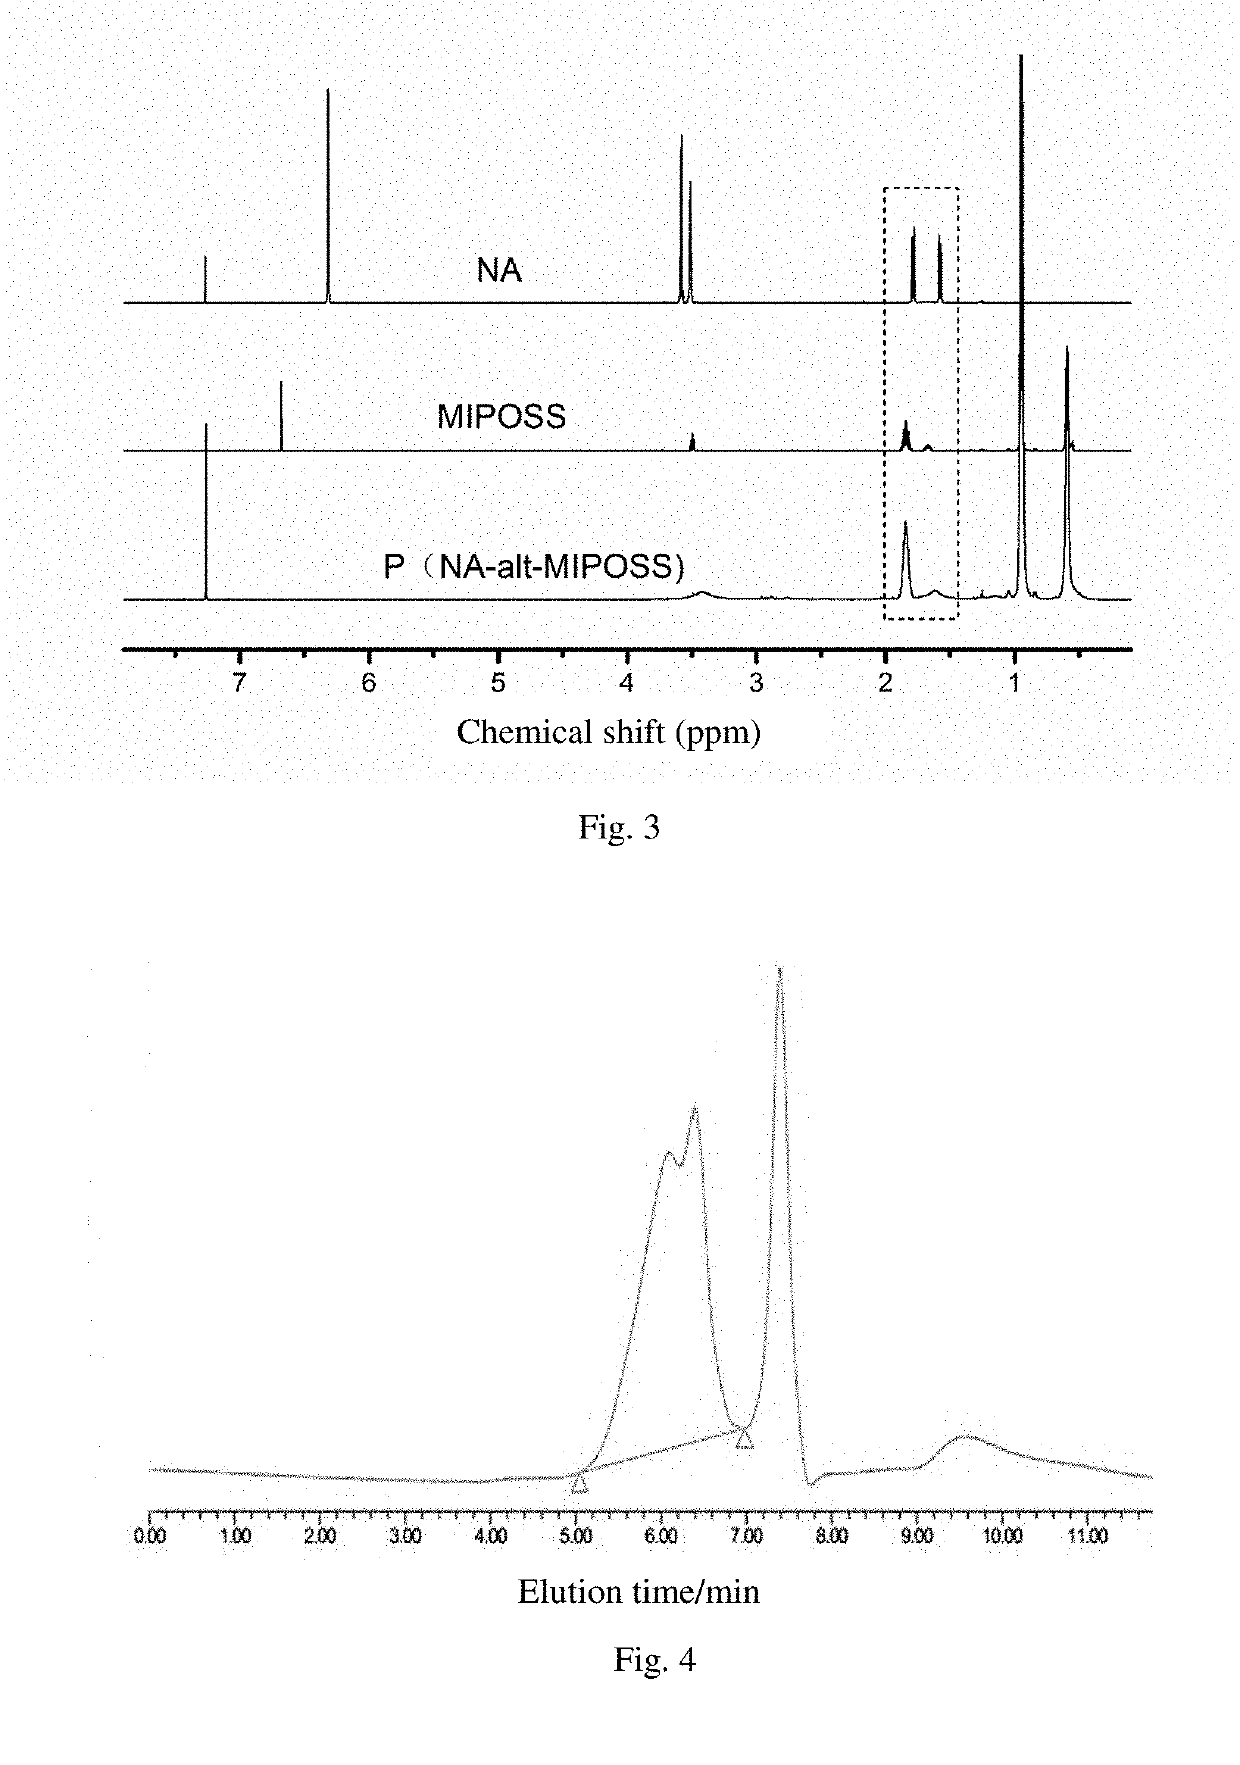 Method for preparing polyimide film having low dielectric constant and high fracture toughness